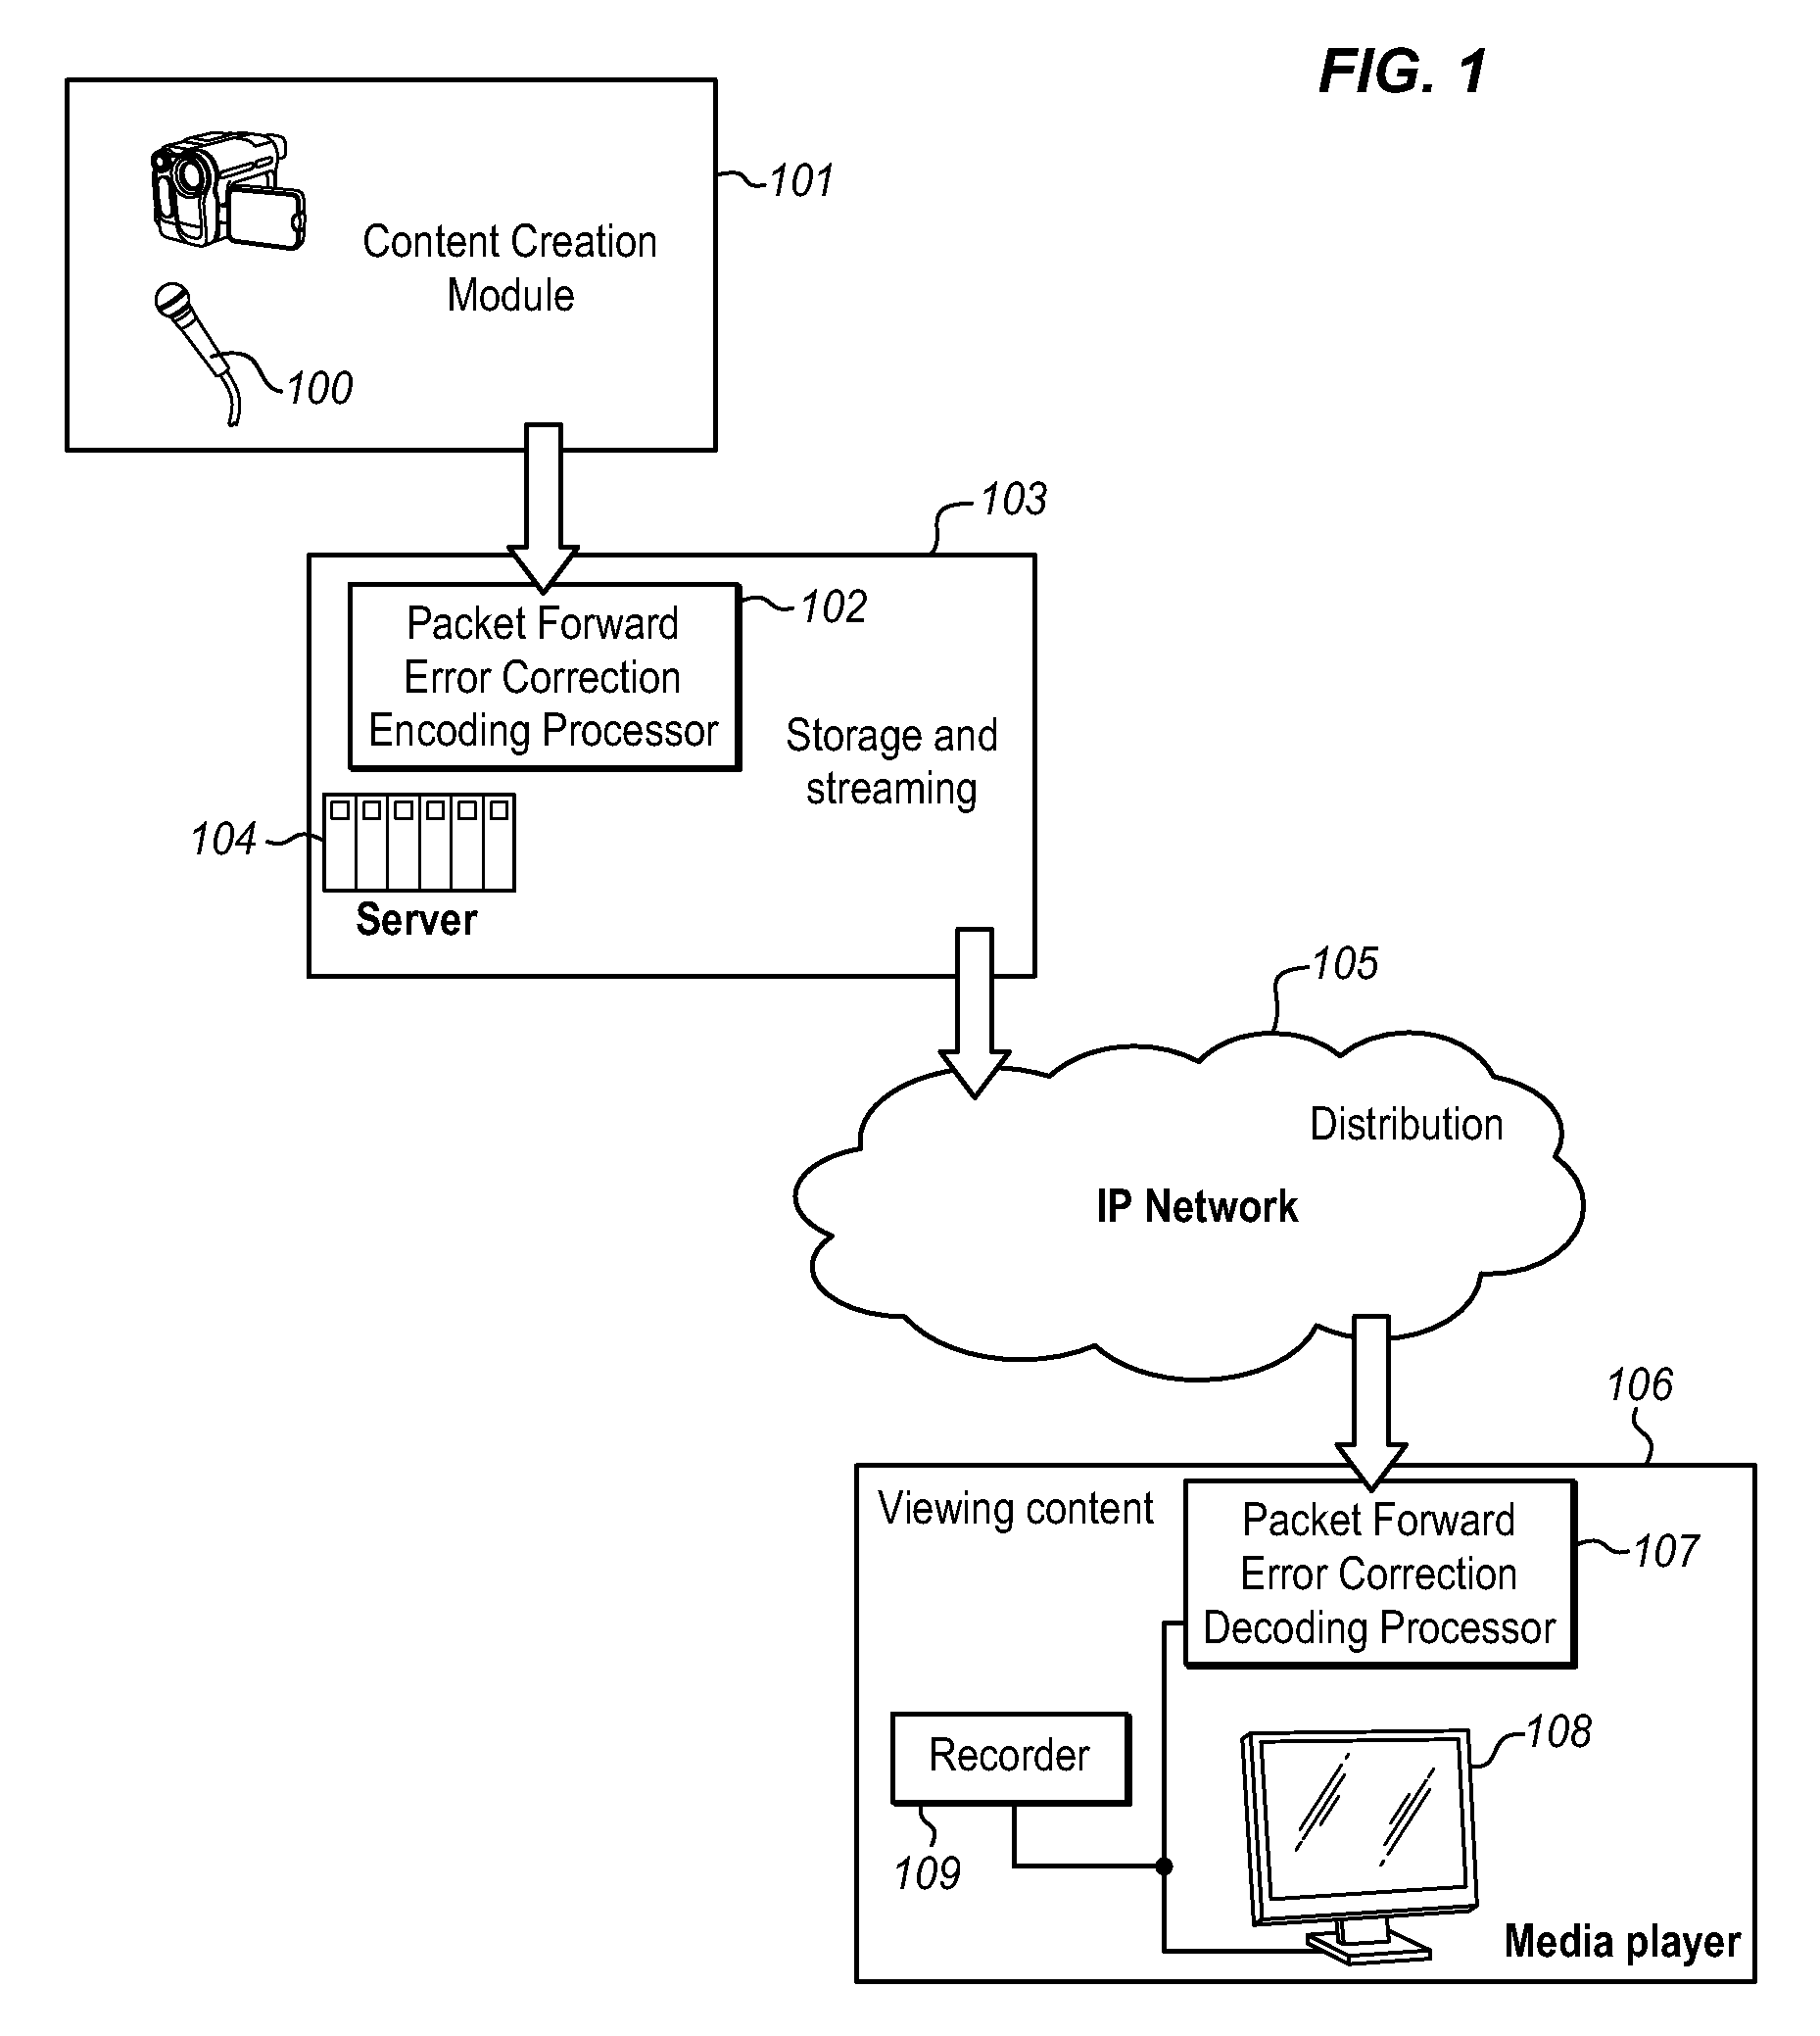 Universal packet loss recovery system for delivery of real-time streaming multimedia content over packet-switched networks